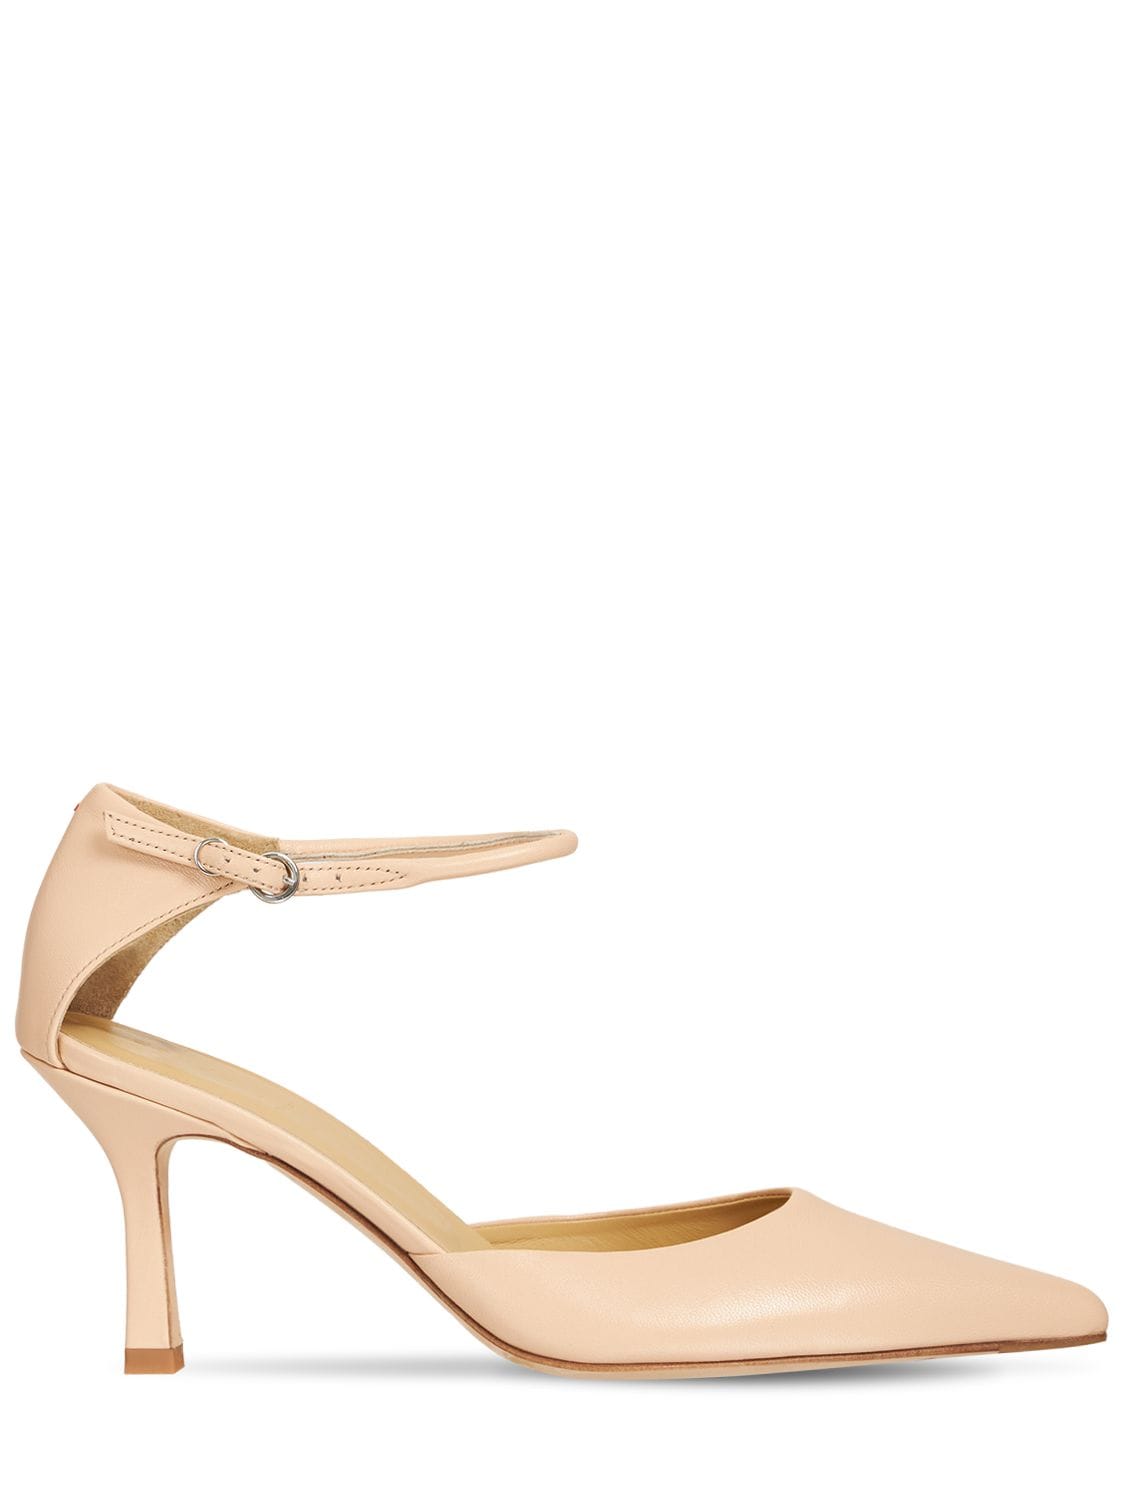 Aeyde 75mm Selma Leather Pumps In Blush